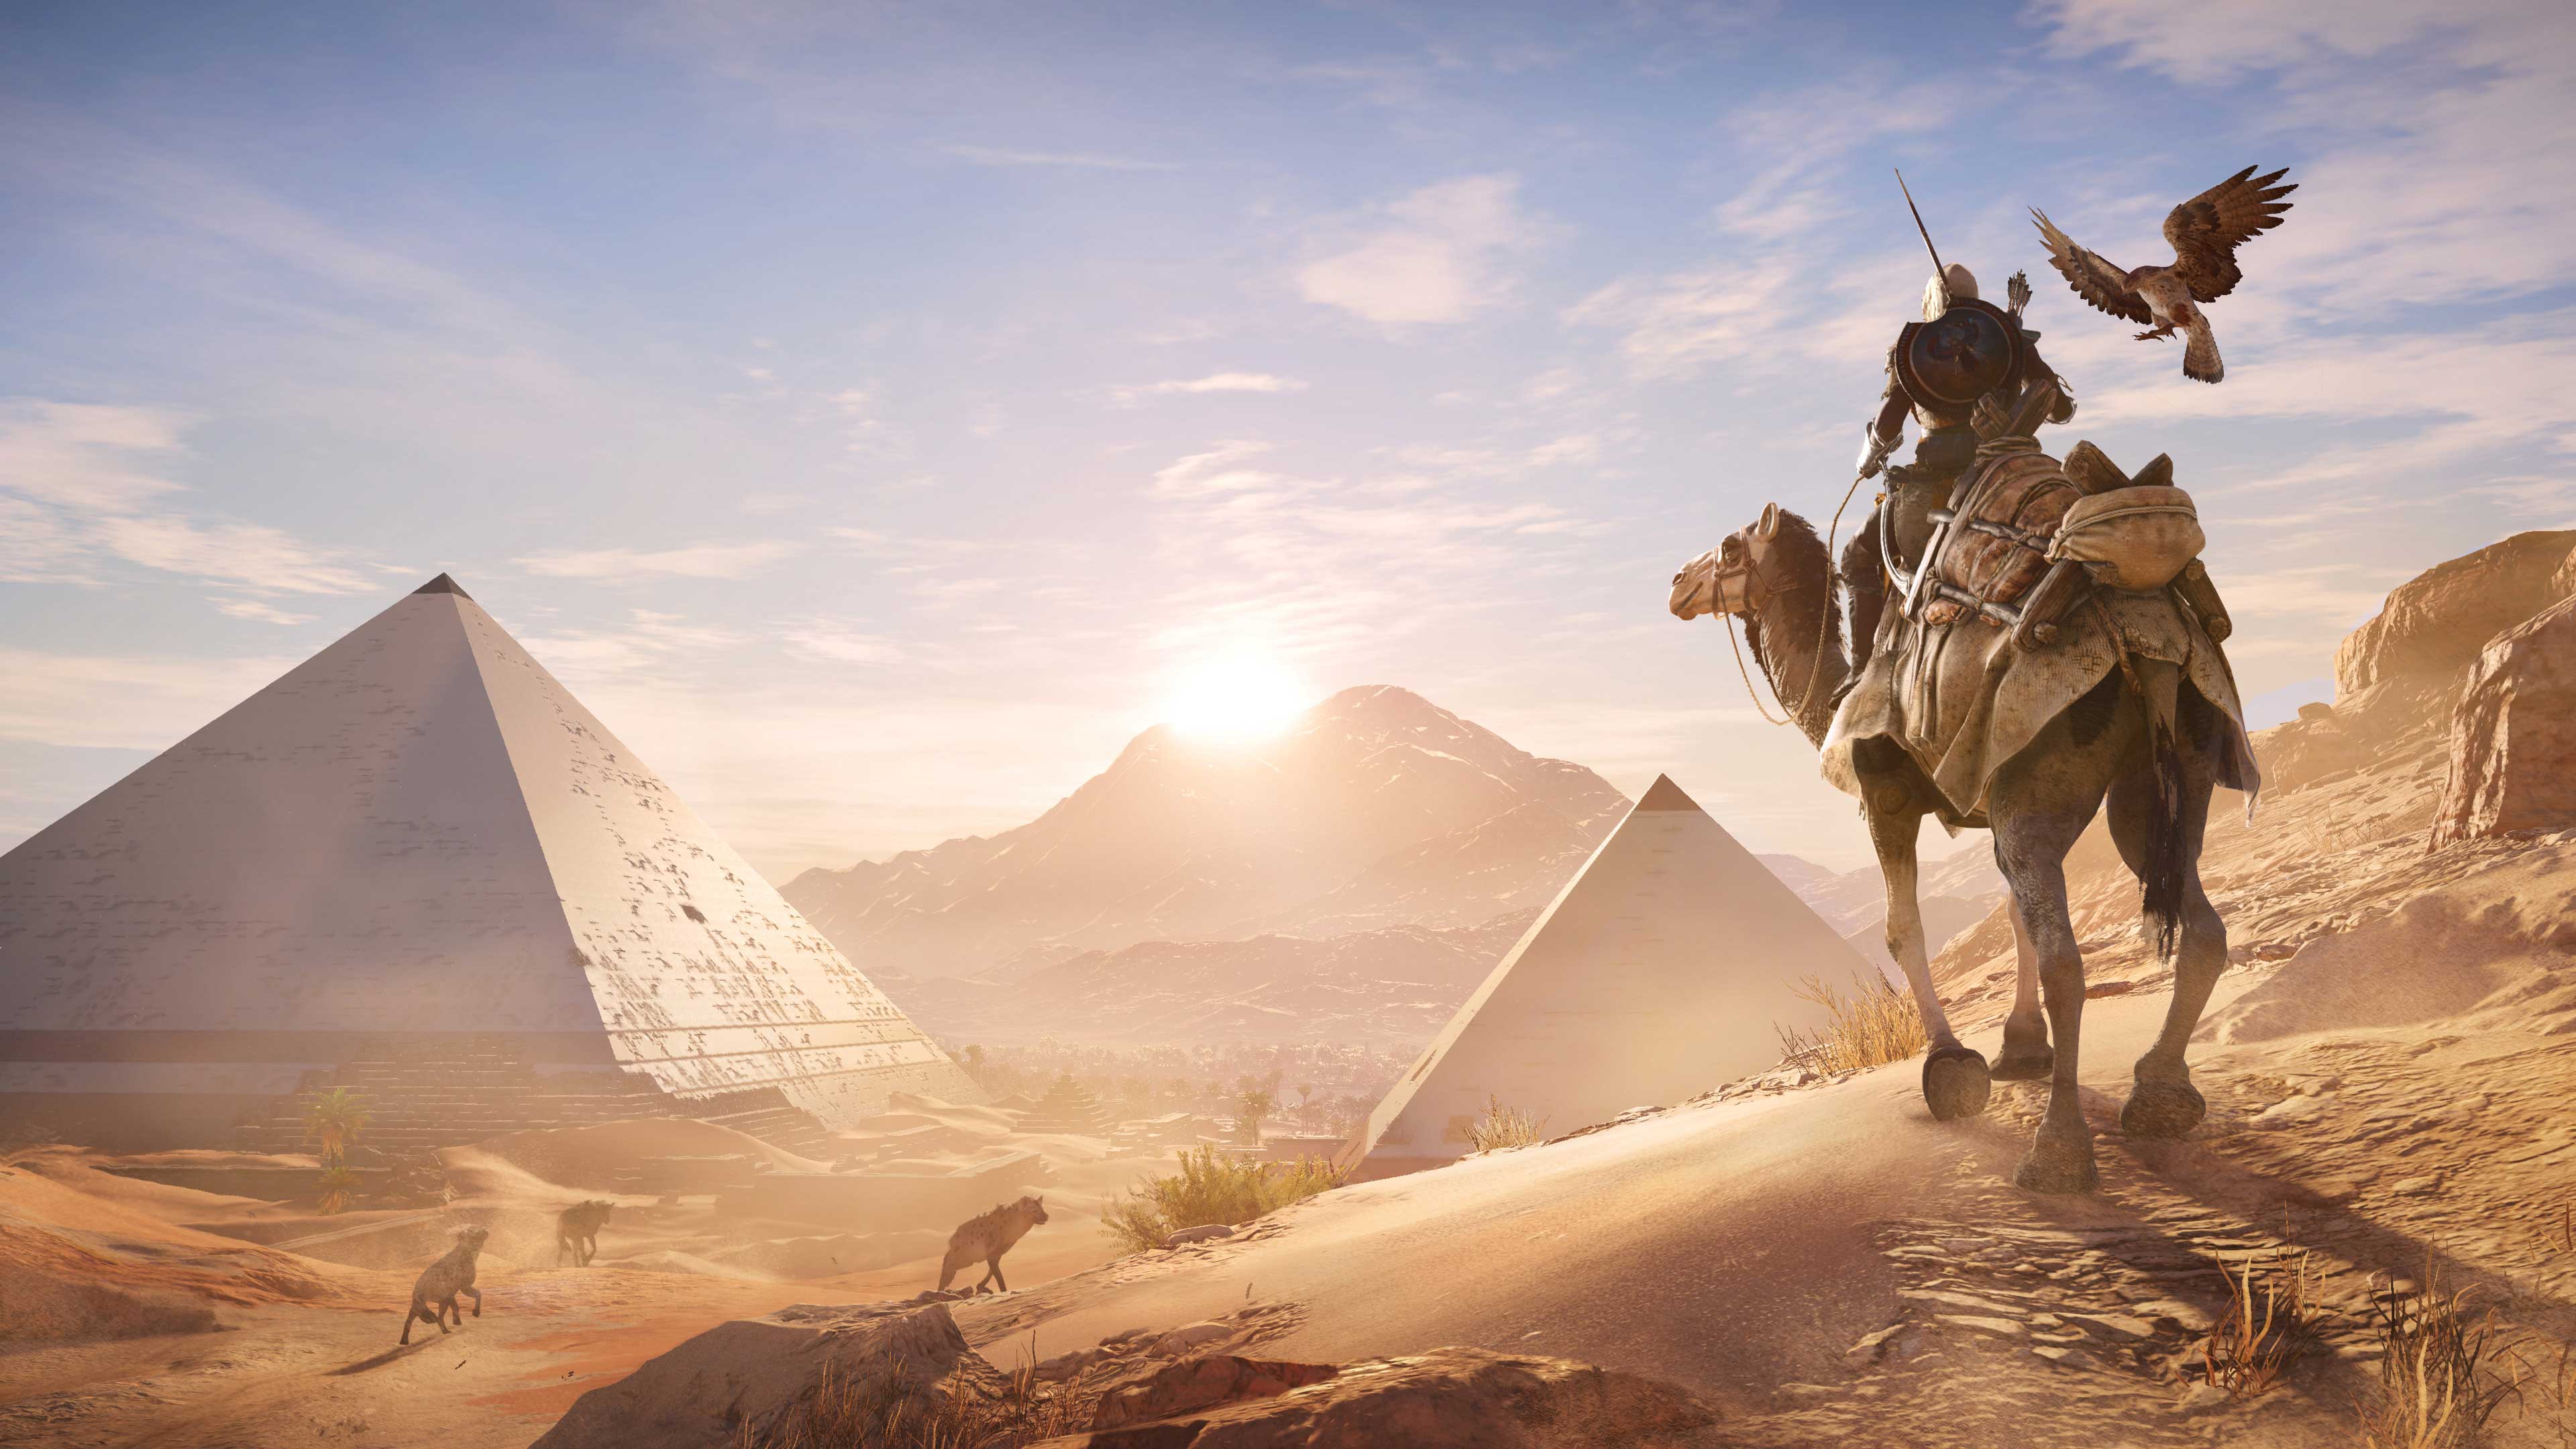 Image for E3 2017: see the full skill tree in Assassin's Creed Origins